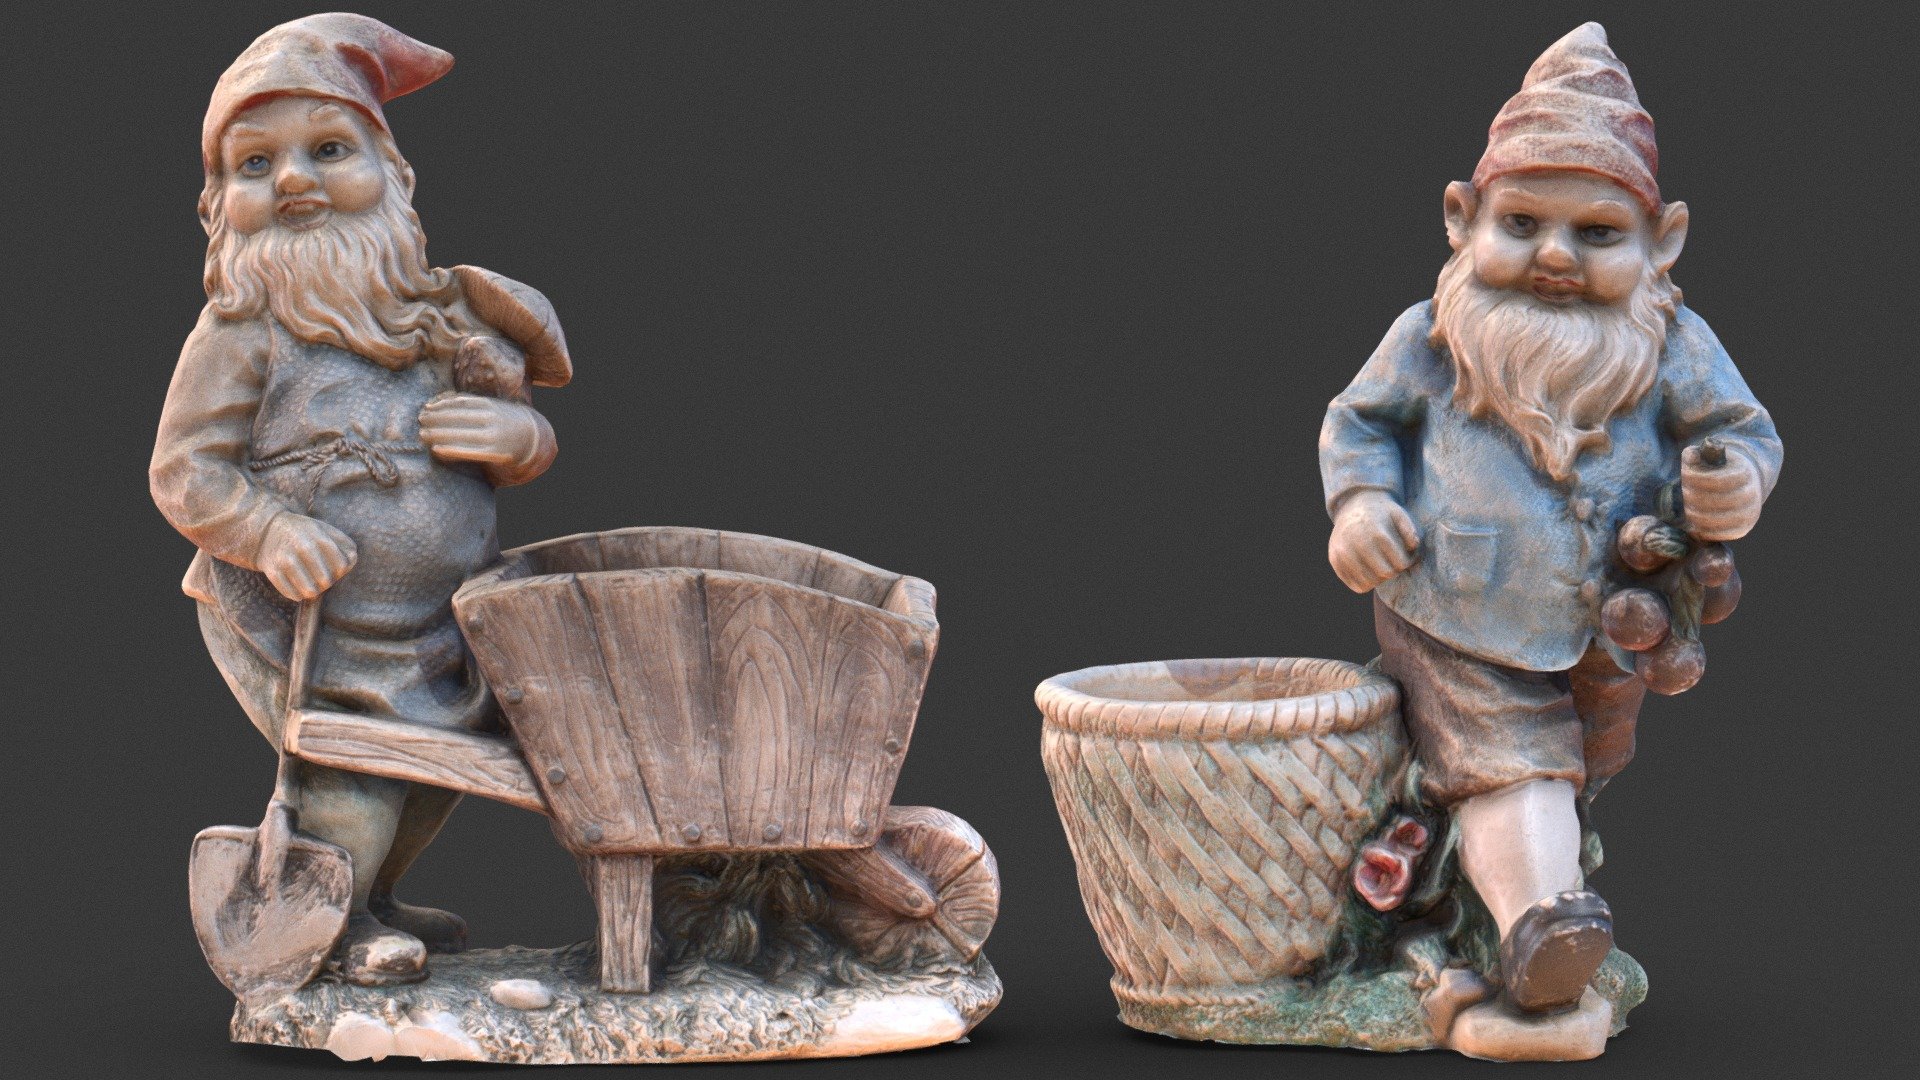 Old garden dwarfs or gnomes with weathered paint. The models are scanned and are in low poly thought so they can be used perfectly in video games 3d model